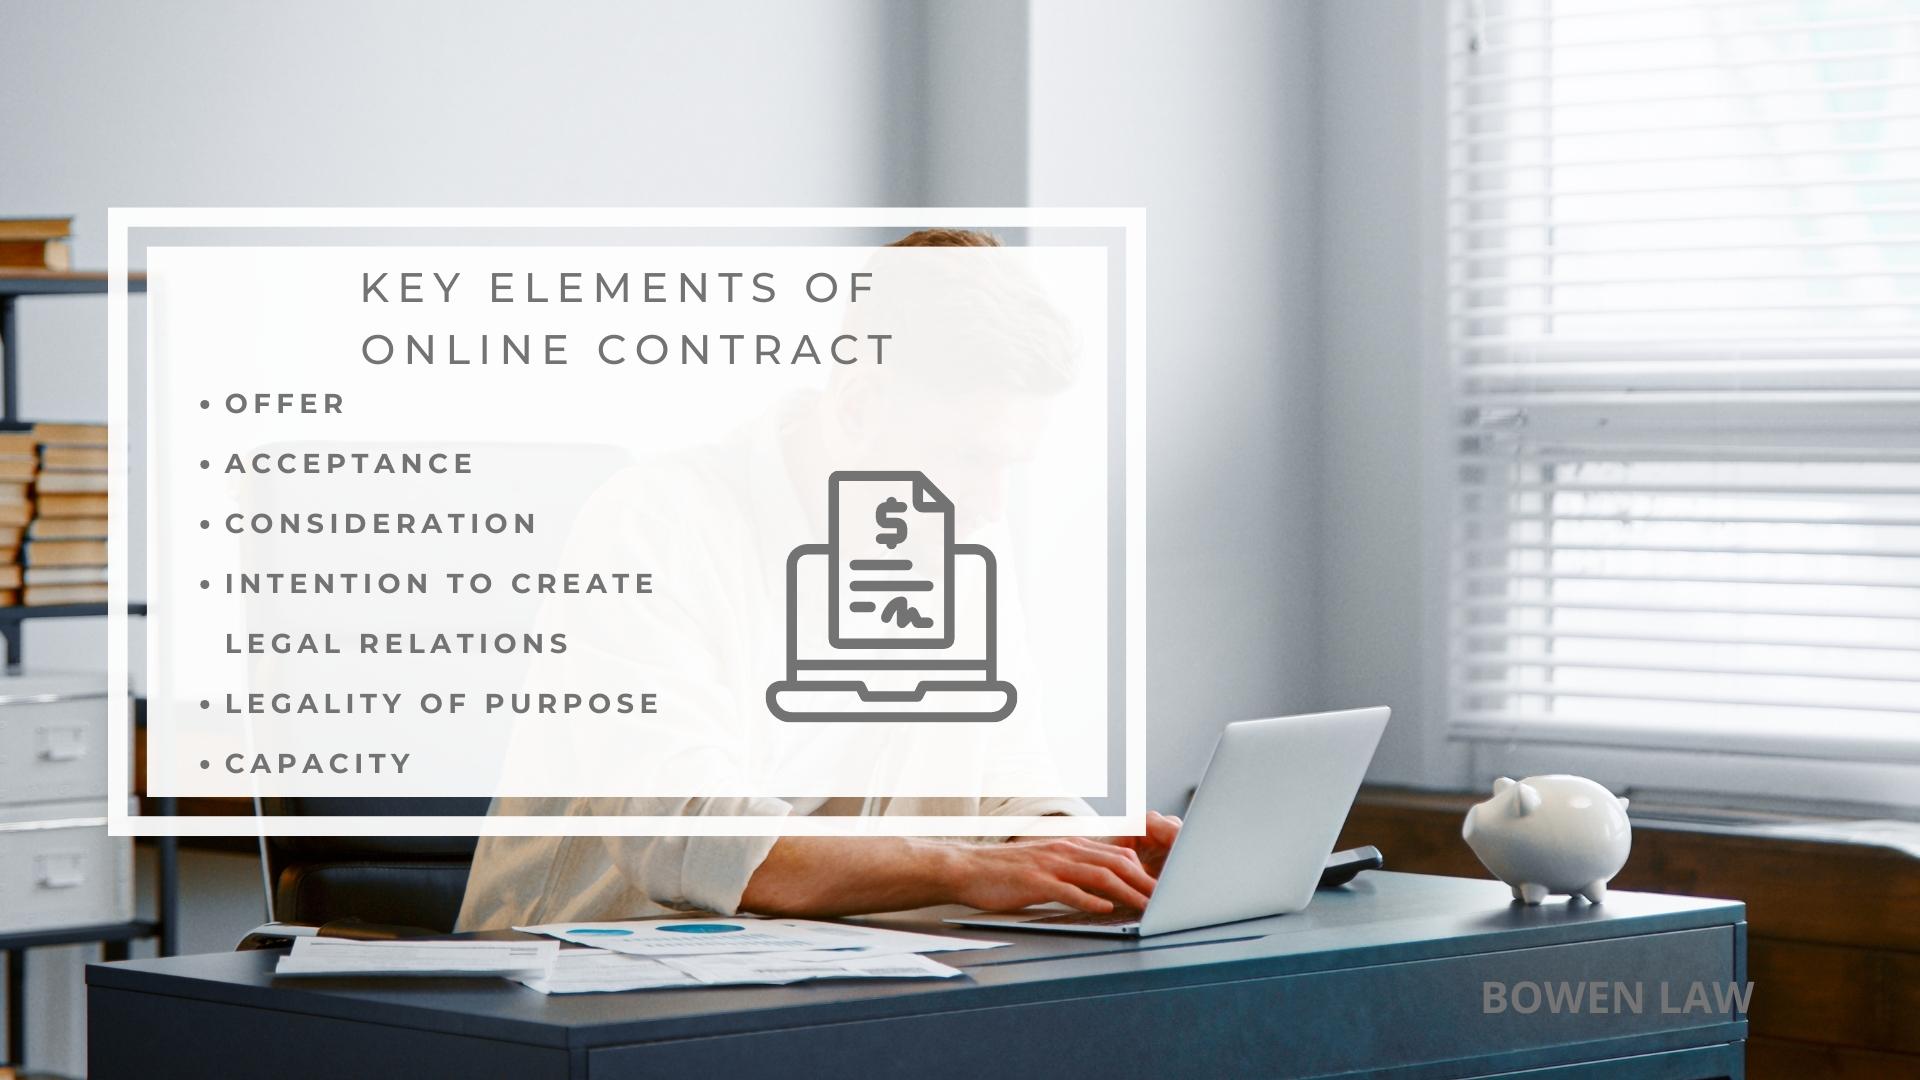 Infographic image of key elements of online contract